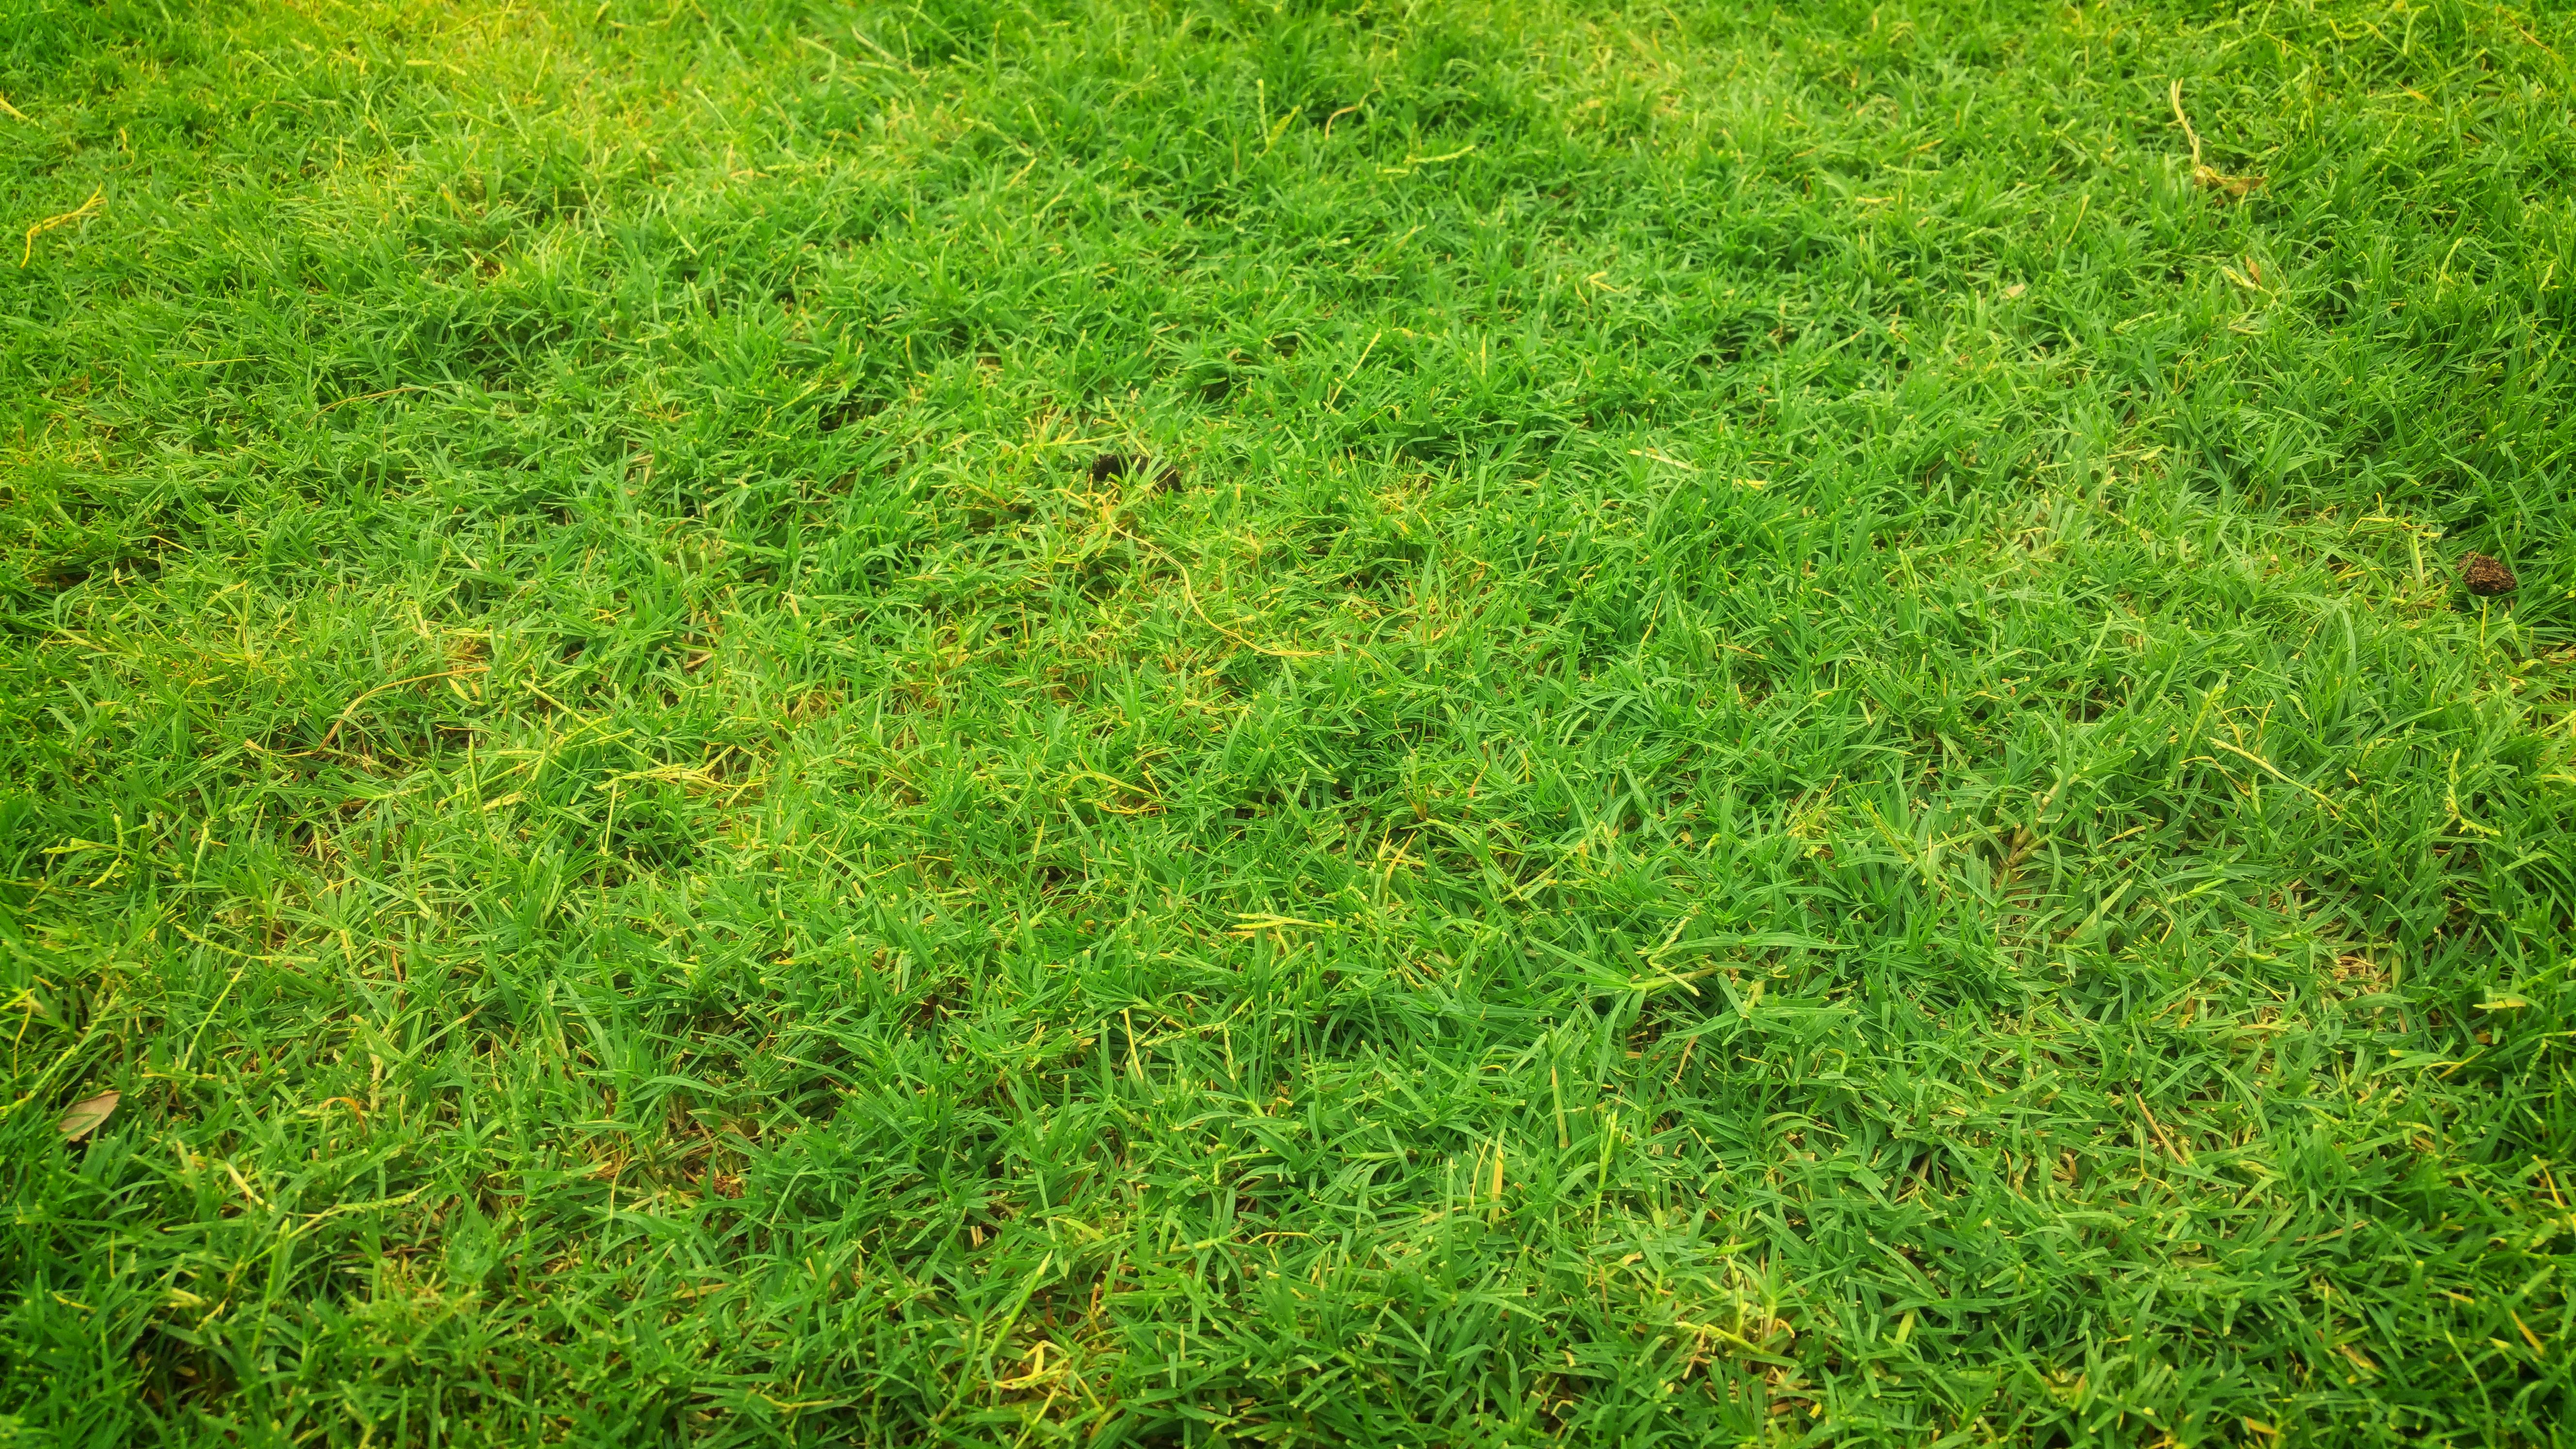 Grass Photos, Download The BEST Free Grass Stock Photos & HD Images